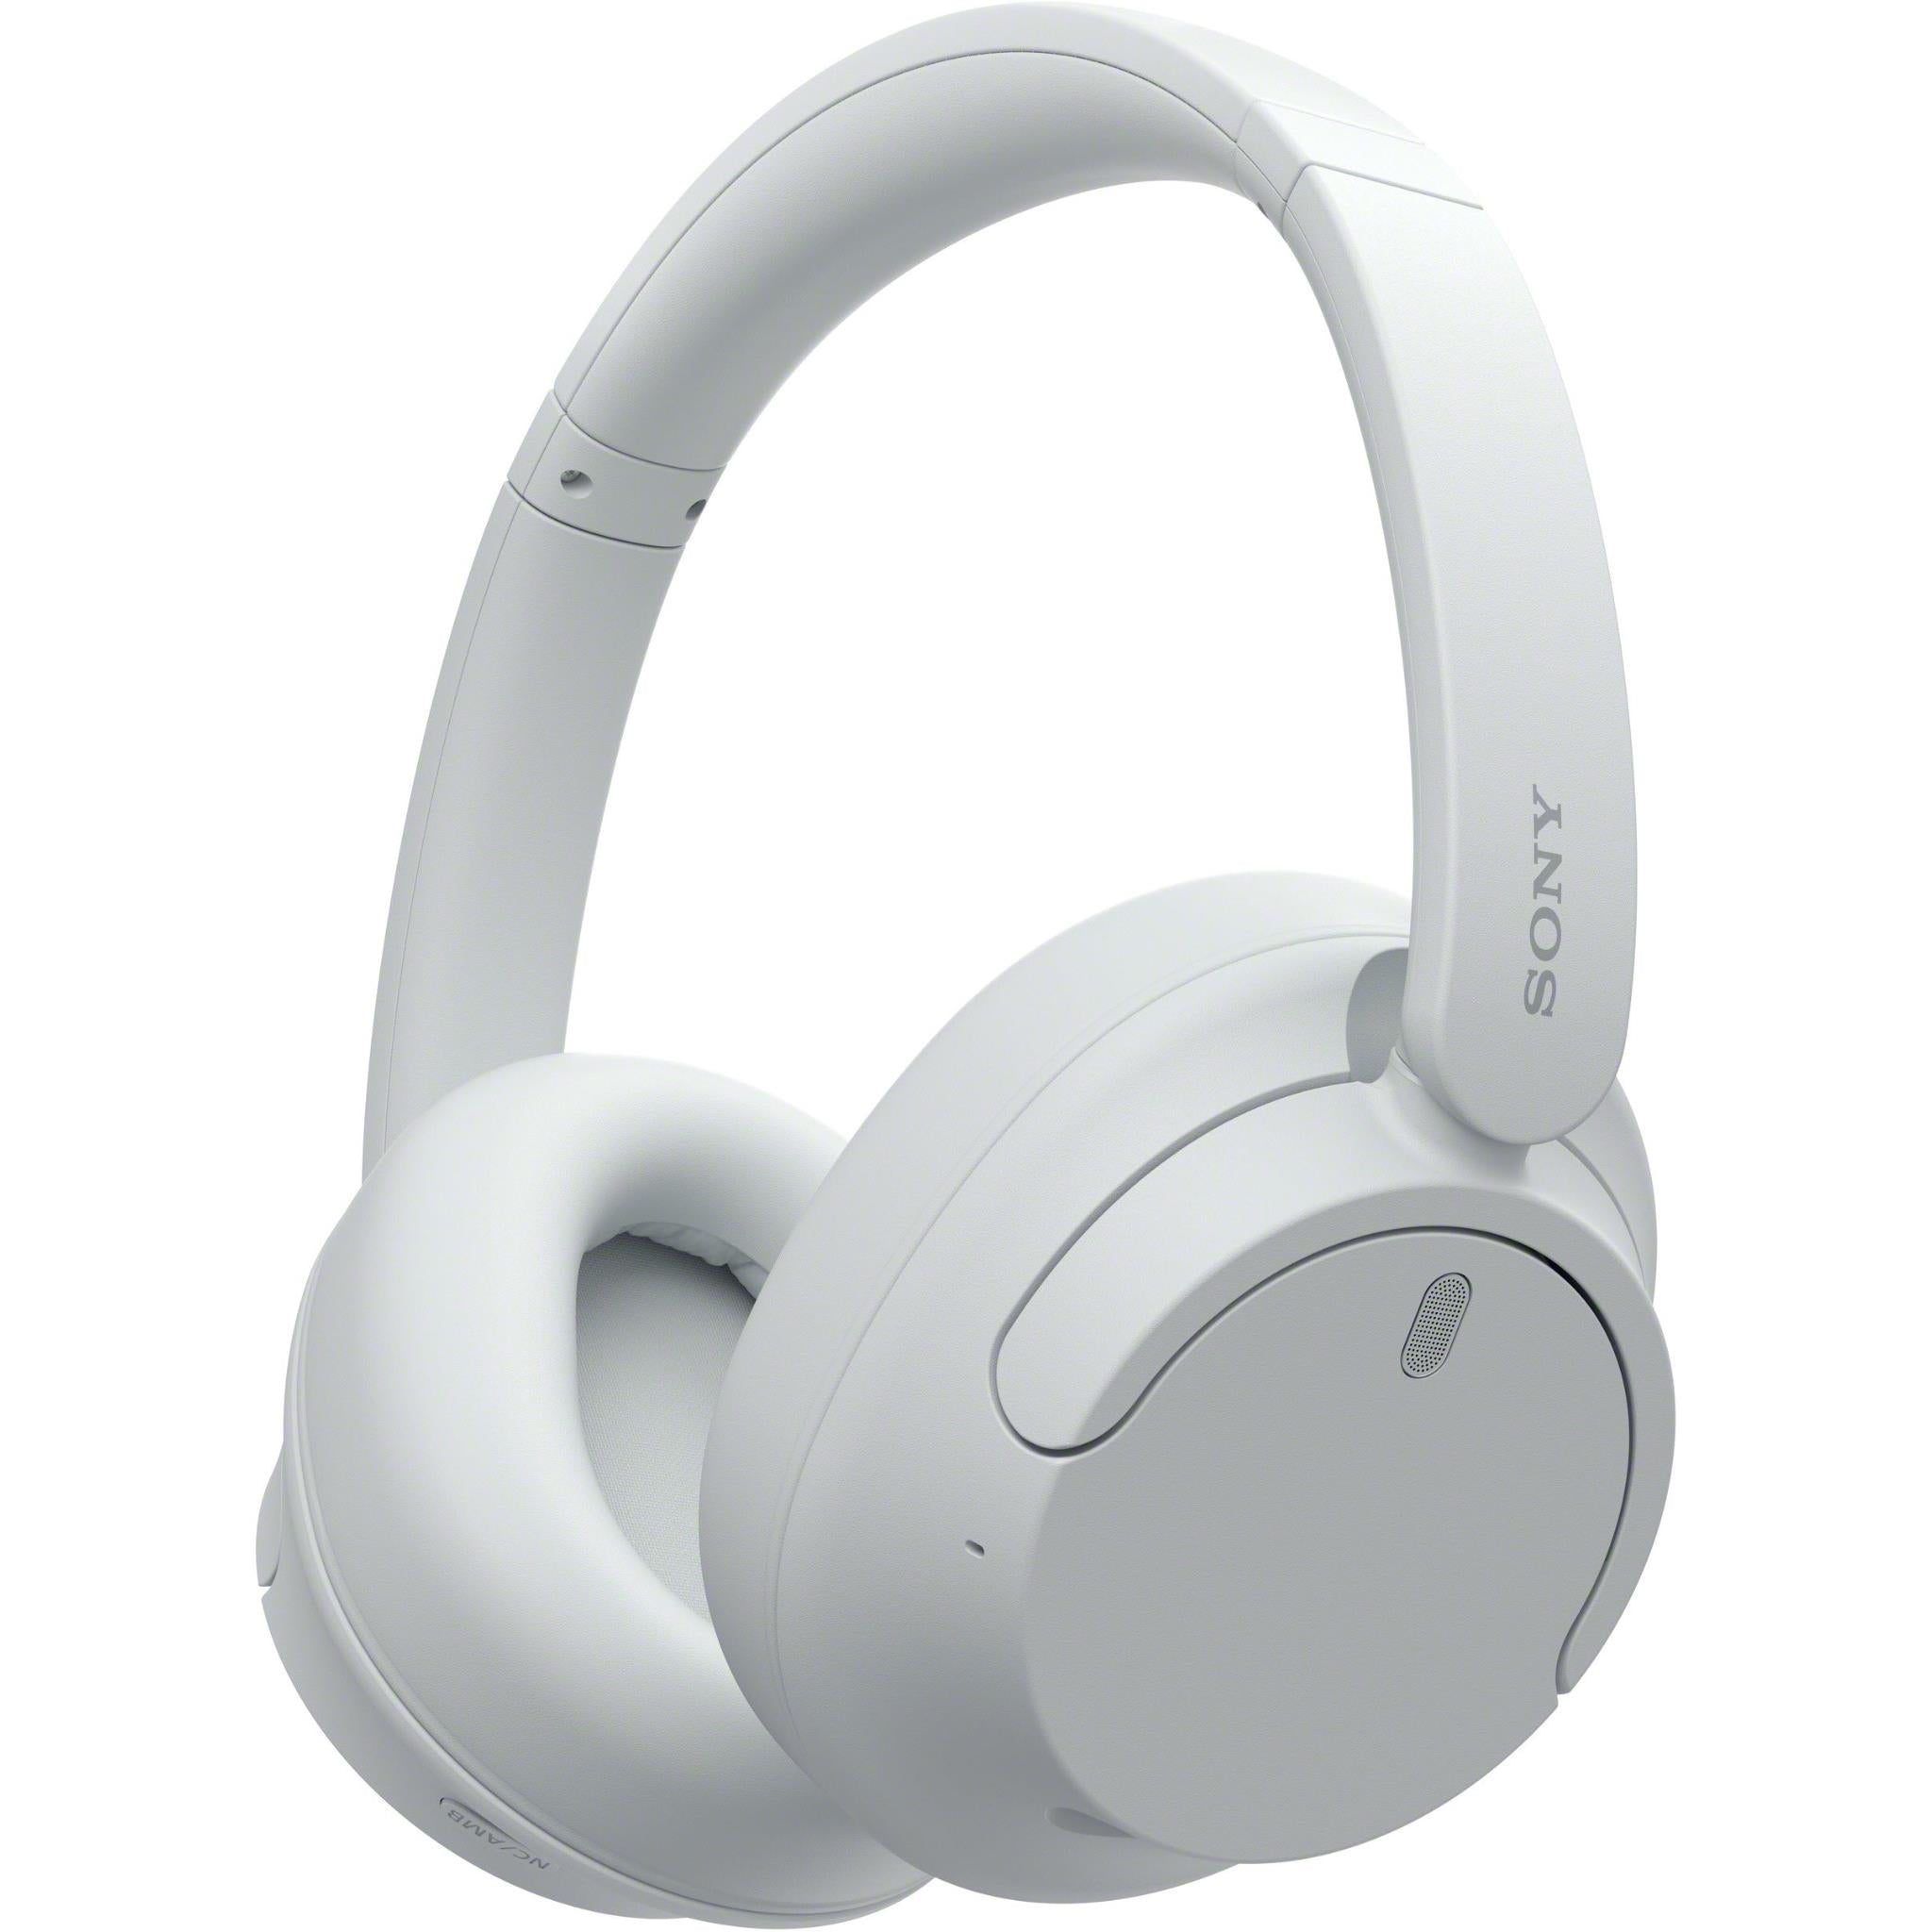 Sony WH-1000XM5 Bluetooth Wireless Noise-Canceling Headphones - Silver